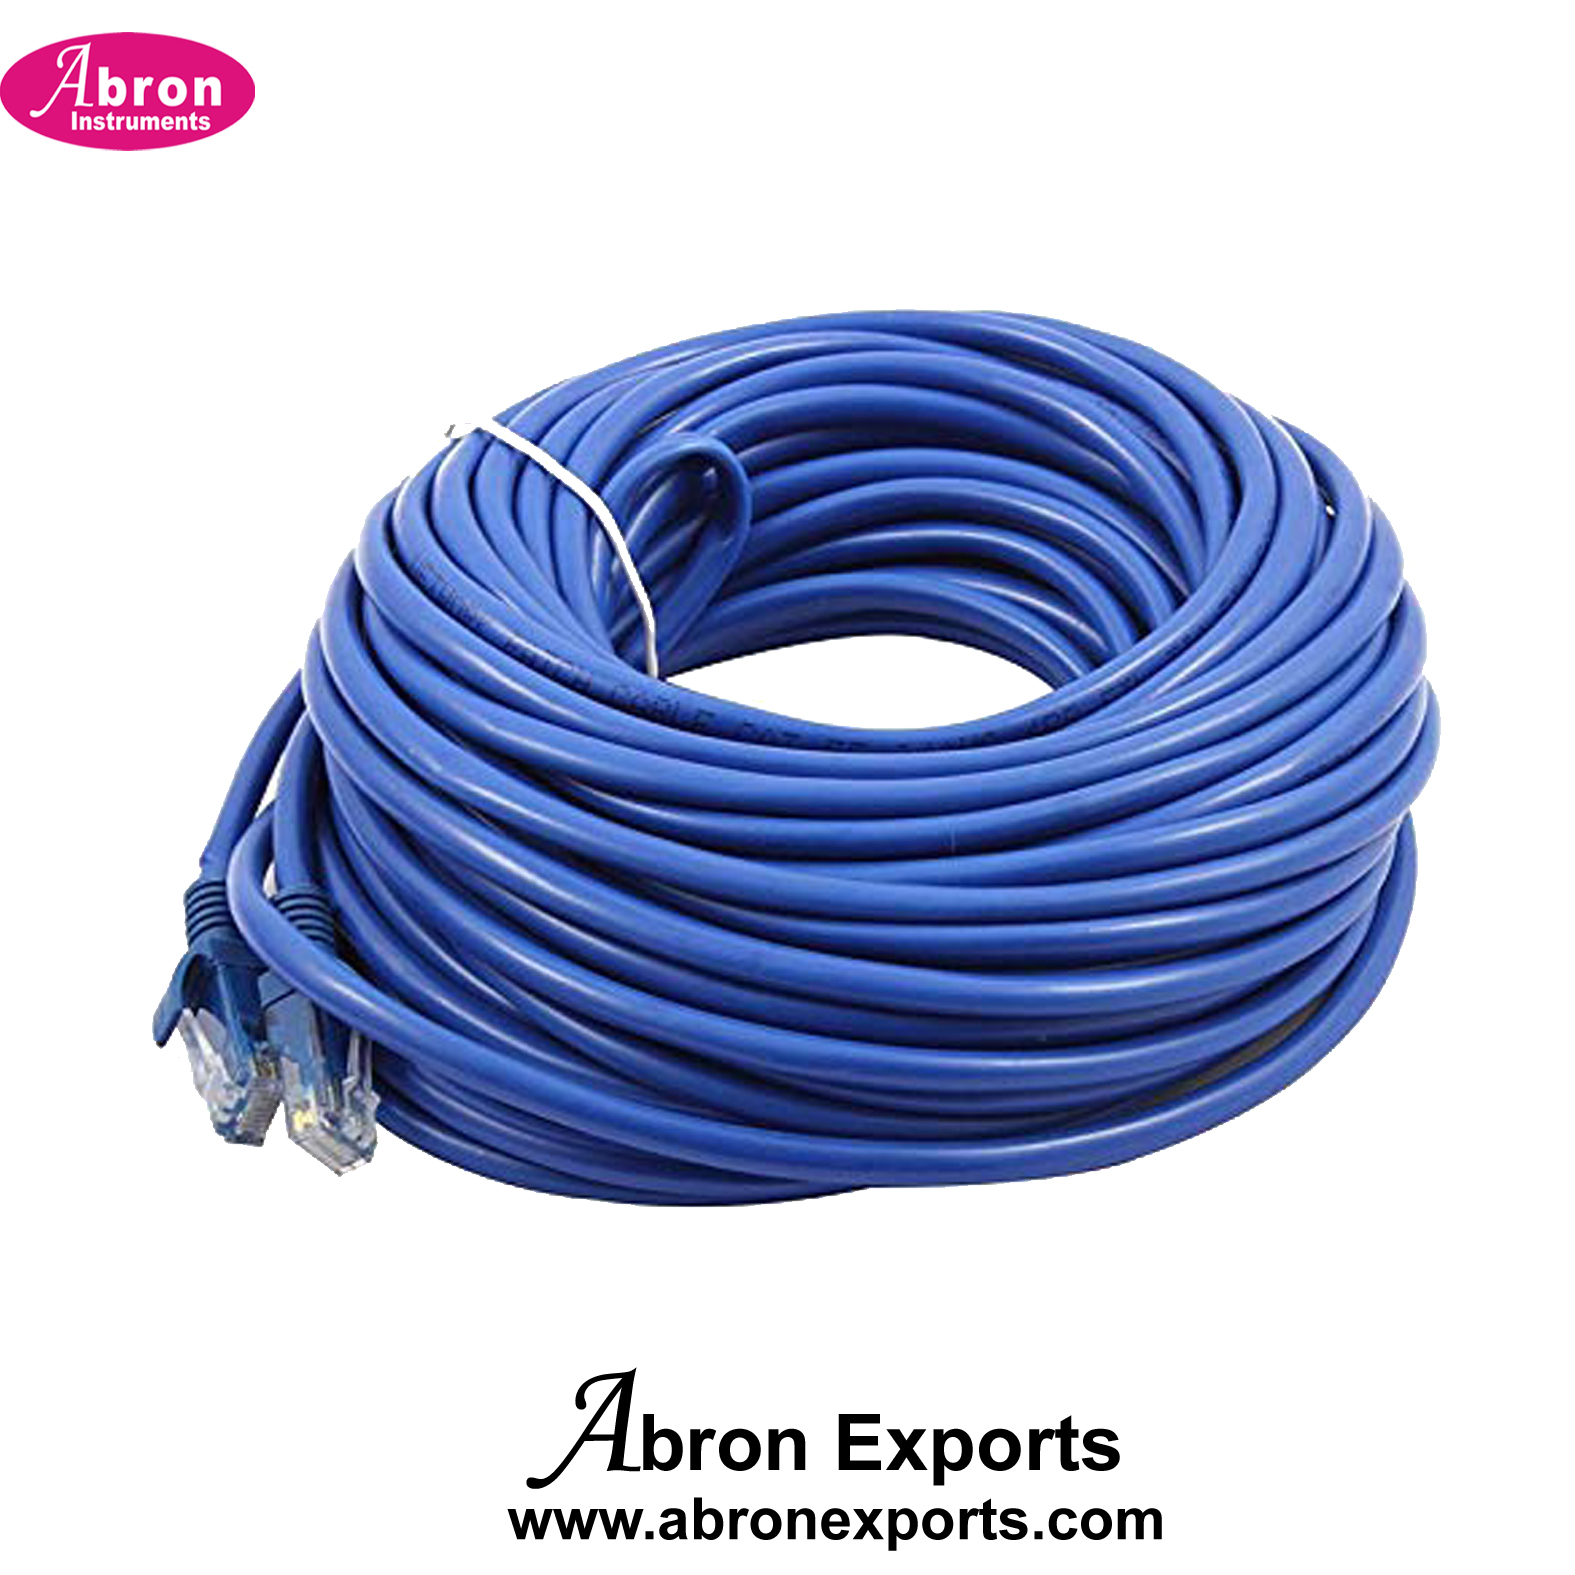 Electronic Spare Cable Lan wire 20 meter CAT 5e Ethernet Patch Cable, RJ45 Computer Network Cord Copper Wire Abron AE-1224LW20 